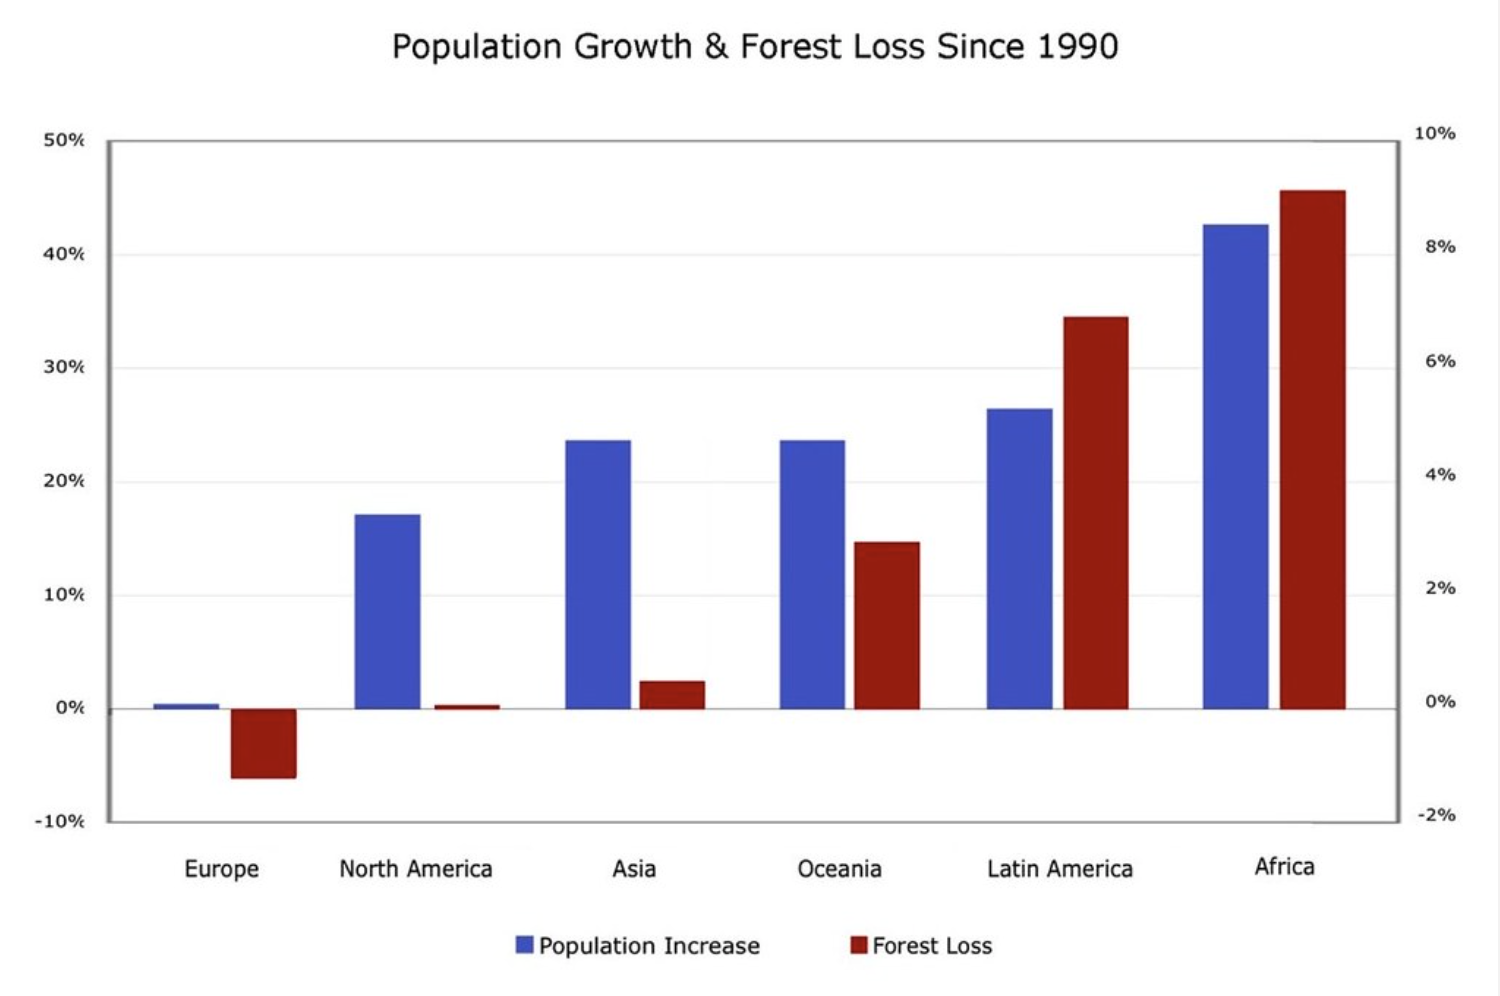 bar graph showing population growth and forest loss since 1990